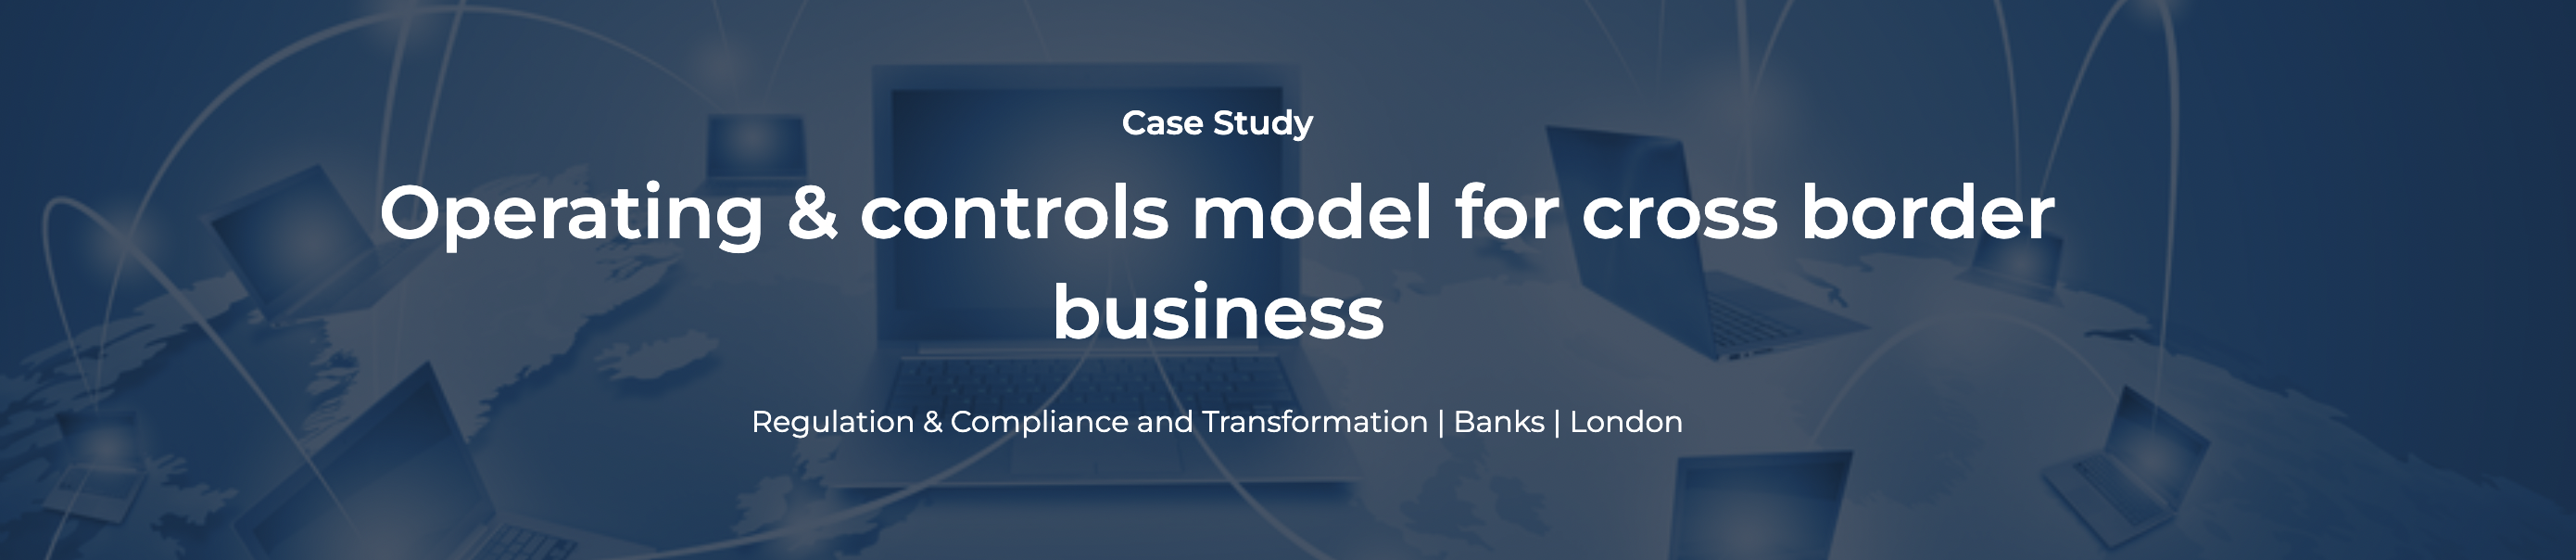 Case Study: Operating & Controls model for cross border business